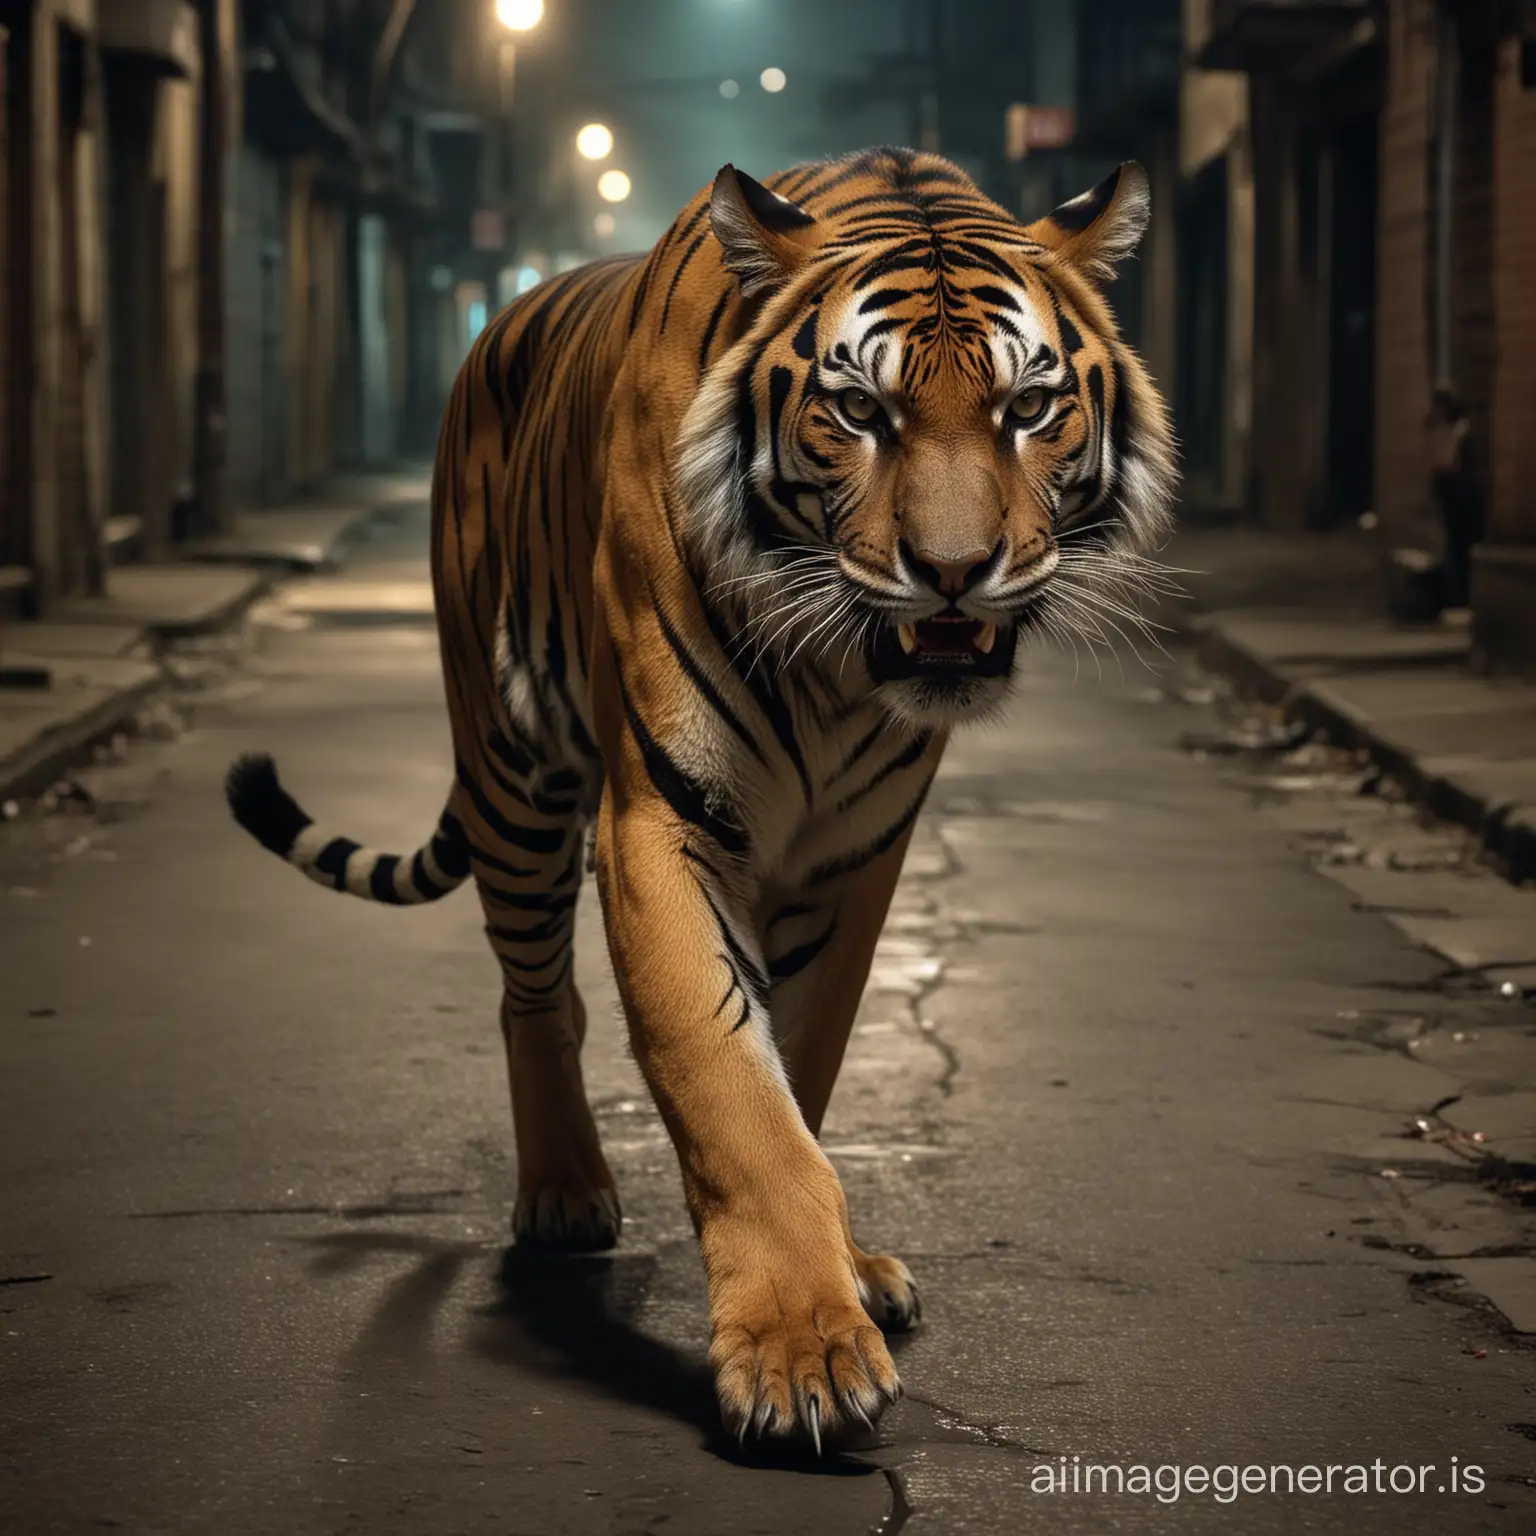 A body of a human, but he is a tiger. Just like a werewolf, but a tiger. Roaming around the street at night, very scary. He has a tiger like skin, very big and mascular.